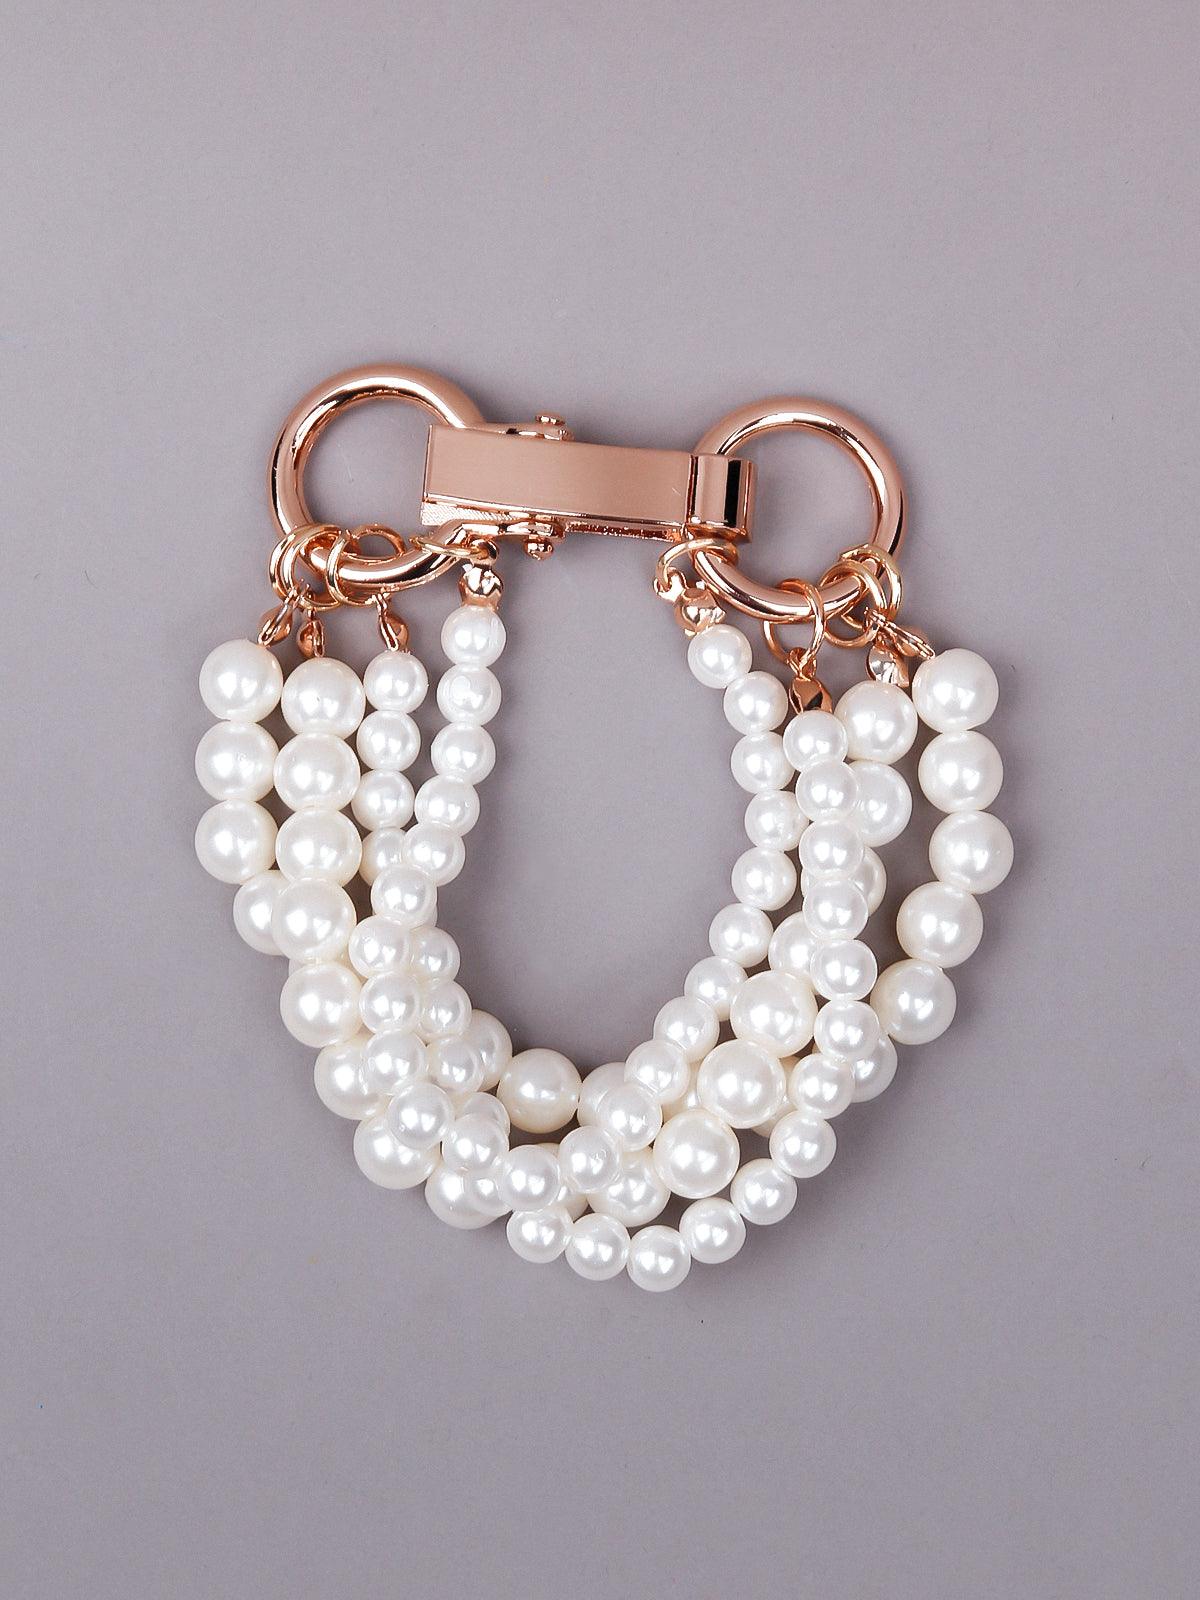 Women's Layered Exquisite Pearl Bracelet - Odette